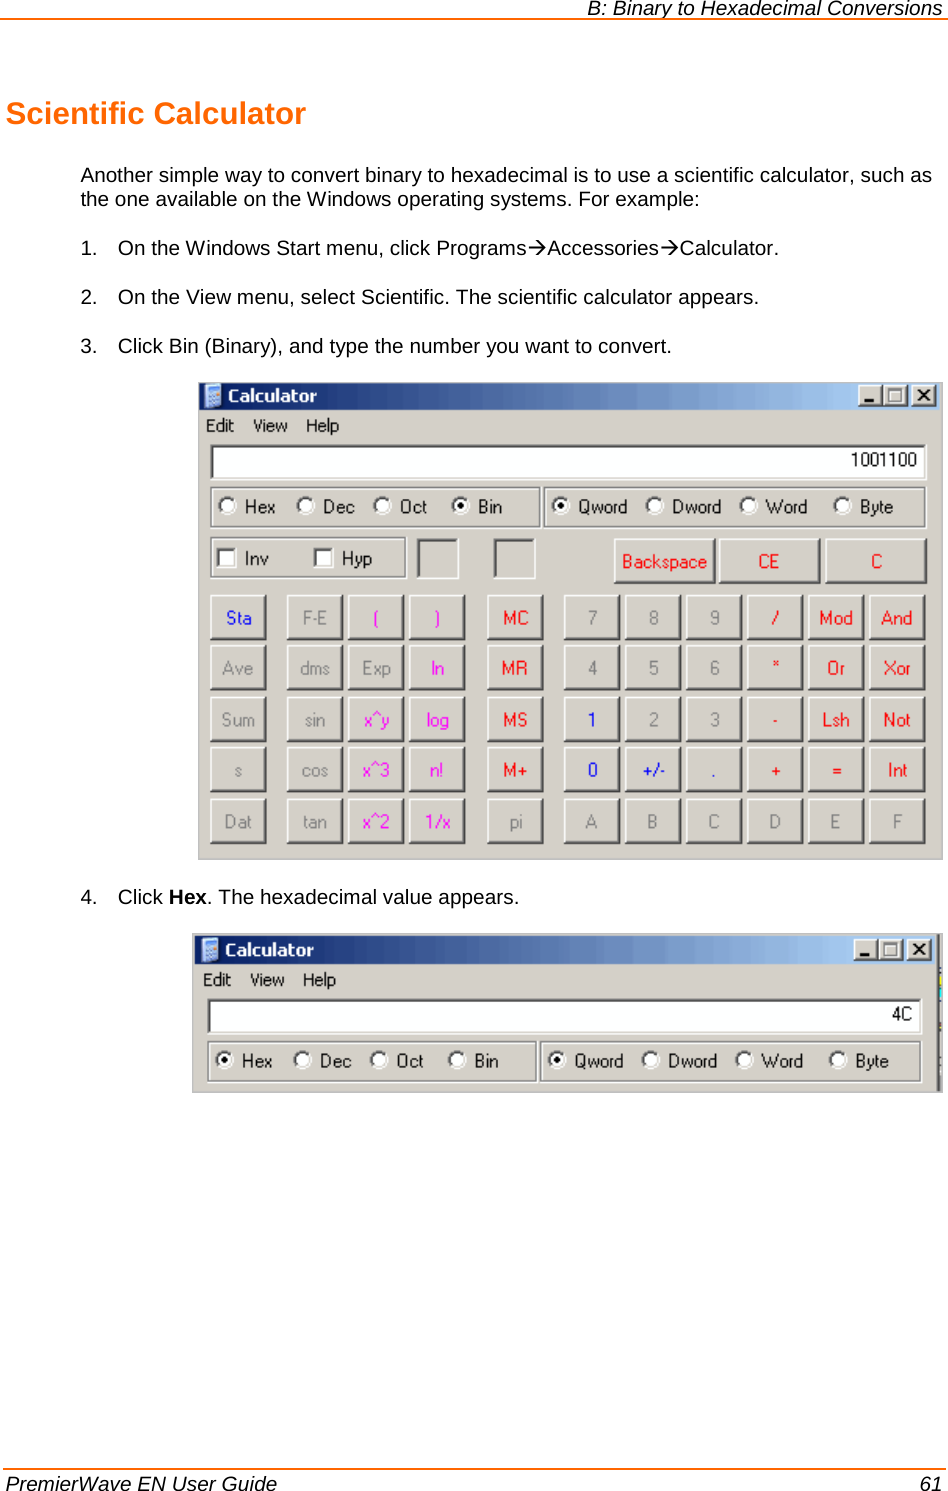  B: Binary to Hexadecimal Conversions   PremierWave EN User Guide    61 Scientific Calculator Another simple way to convert binary to hexadecimal is to use a scientific calculator, such as the one available on the Windows operating systems. For example: 1. On the Windows Start menu, click ProgramsAccessoriesCalculator. 2. On the View menu, select Scientific. The scientific calculator appears. 3. Click Bin (Binary), and type the number you want to convert.   4. Click Hex. The hexadecimal value appears.    